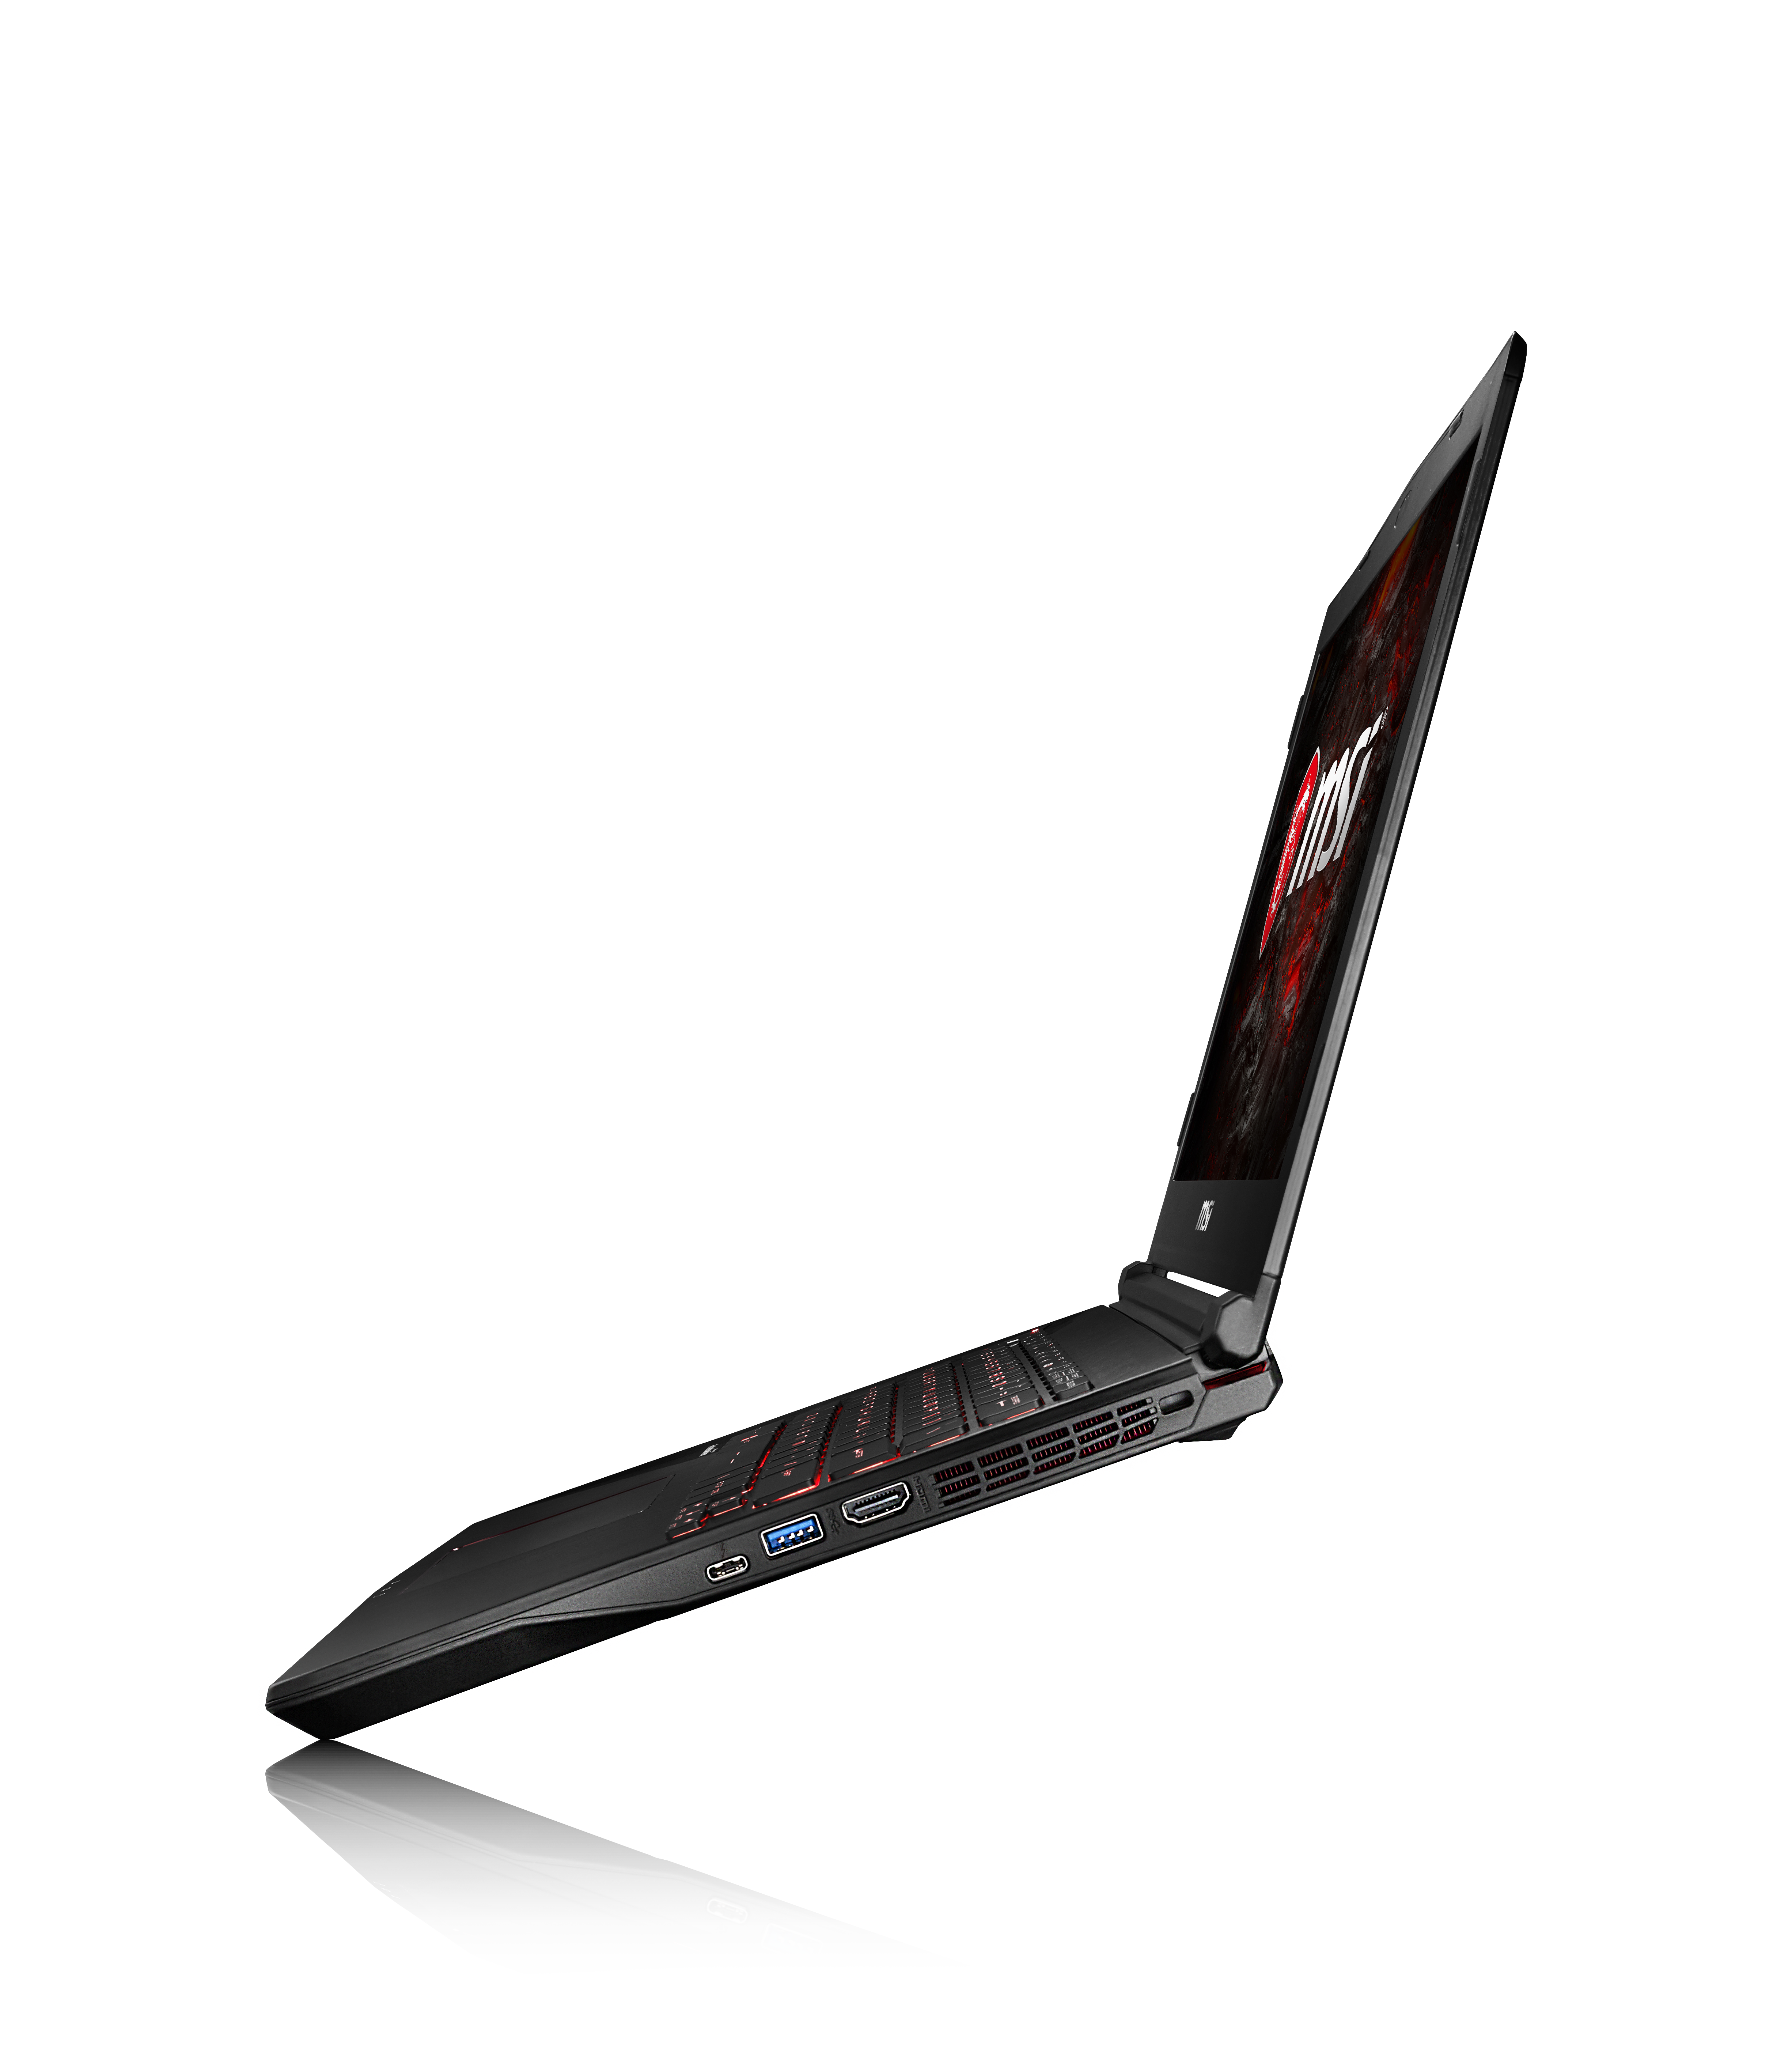 The MSI GS43VR with Windows 10